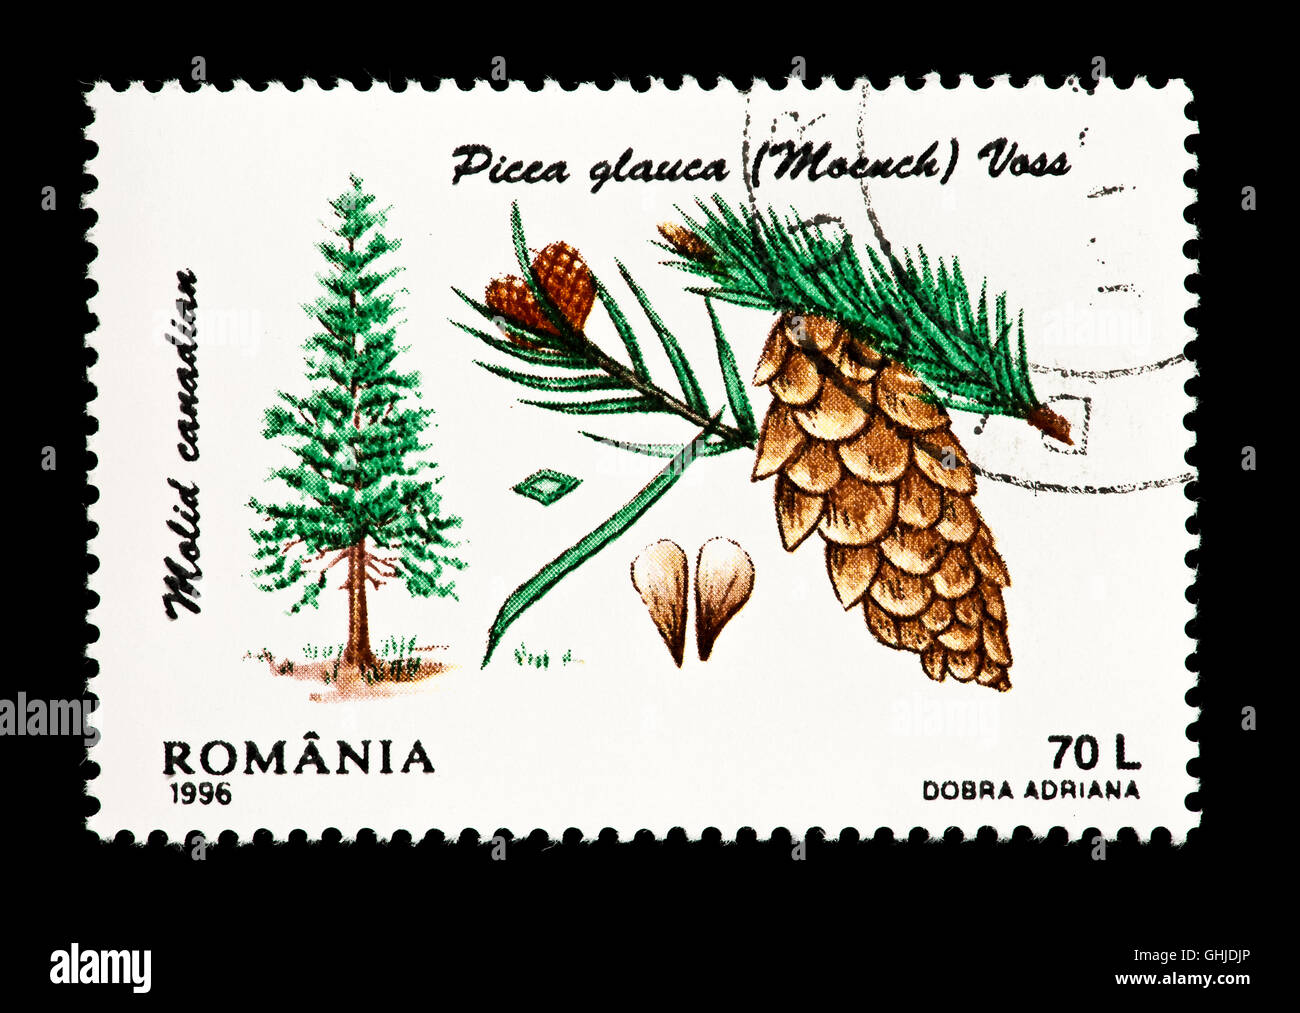 Postage stamp from Romania depicting the seeds, cones branches and tree of  white spruce (Picea glauca) Stock Photo